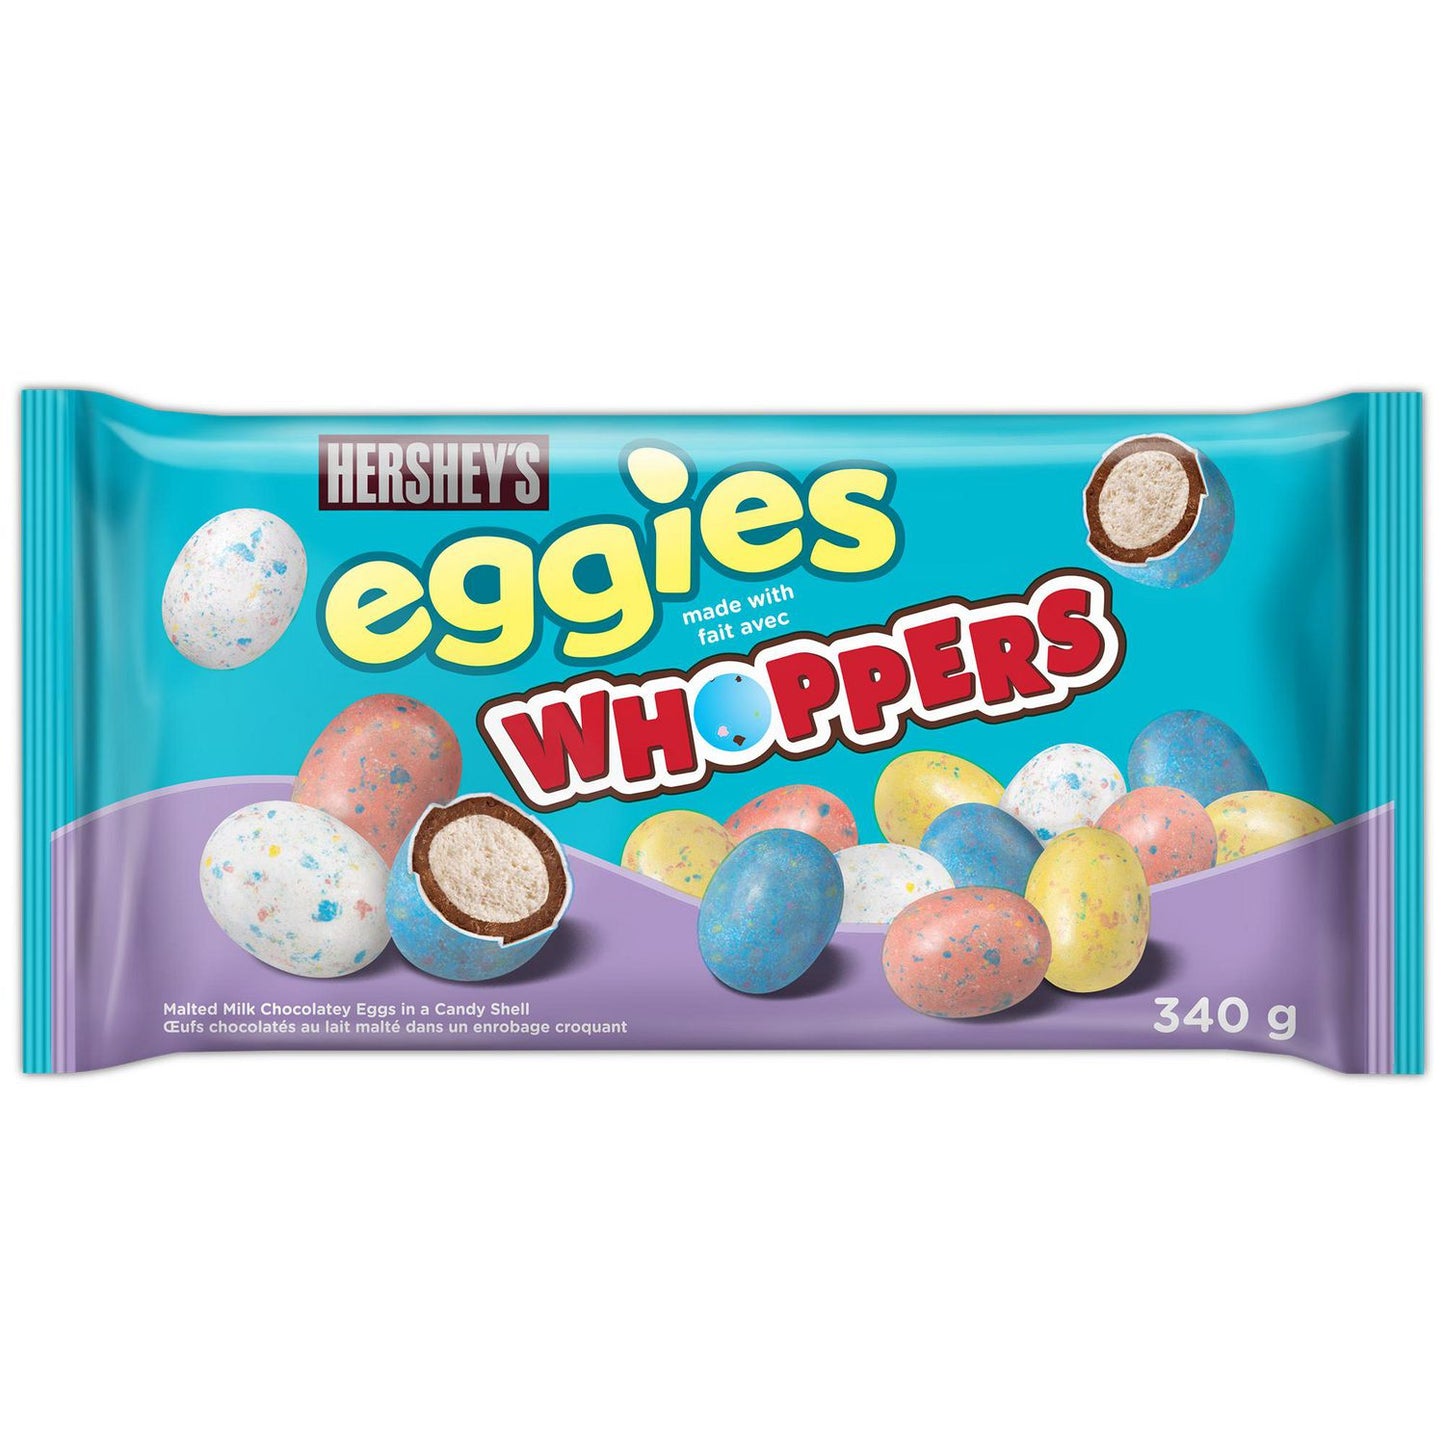 HERSHEY'S EGGIES made with WHOPPERS Malted Milk Chocolatey Easter Candy